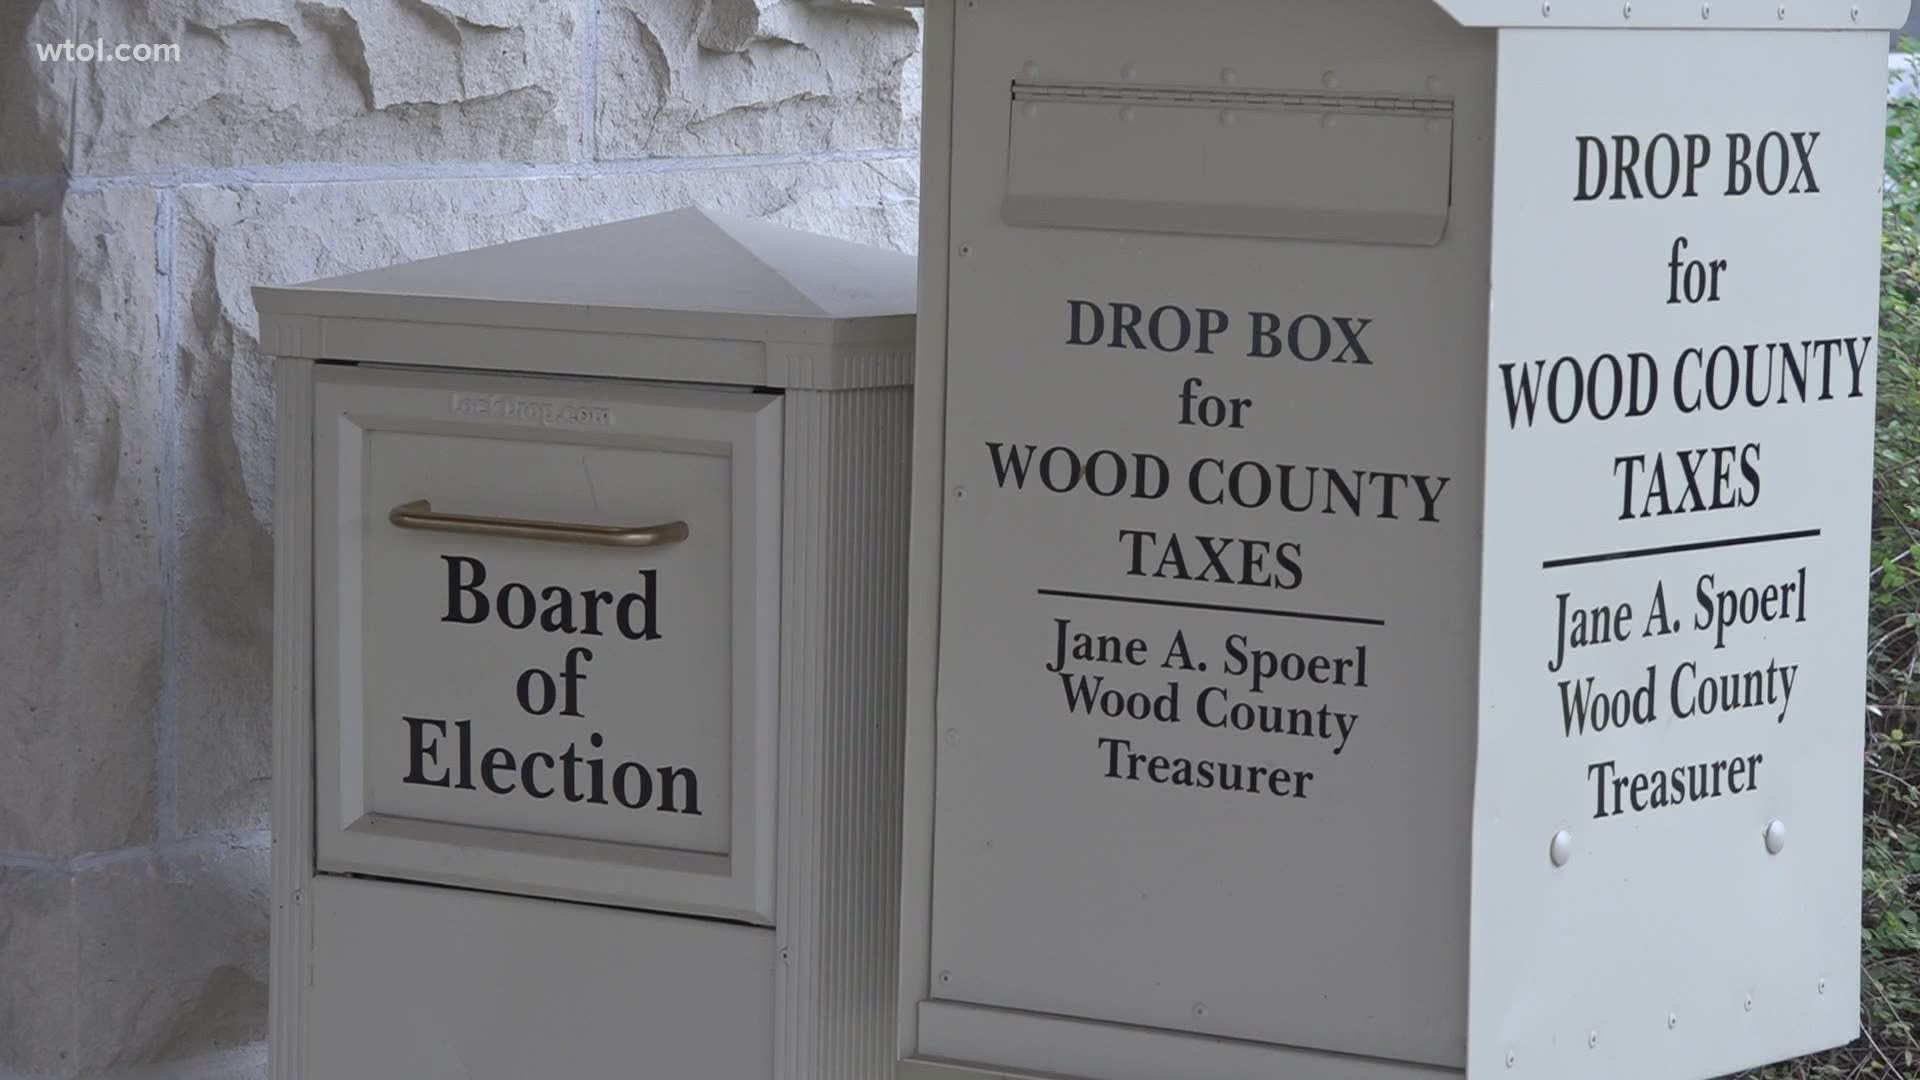 While the exact number of drop boxes each county will be allowed to have is still up in the air, the one in Wood County is filling up quickly.